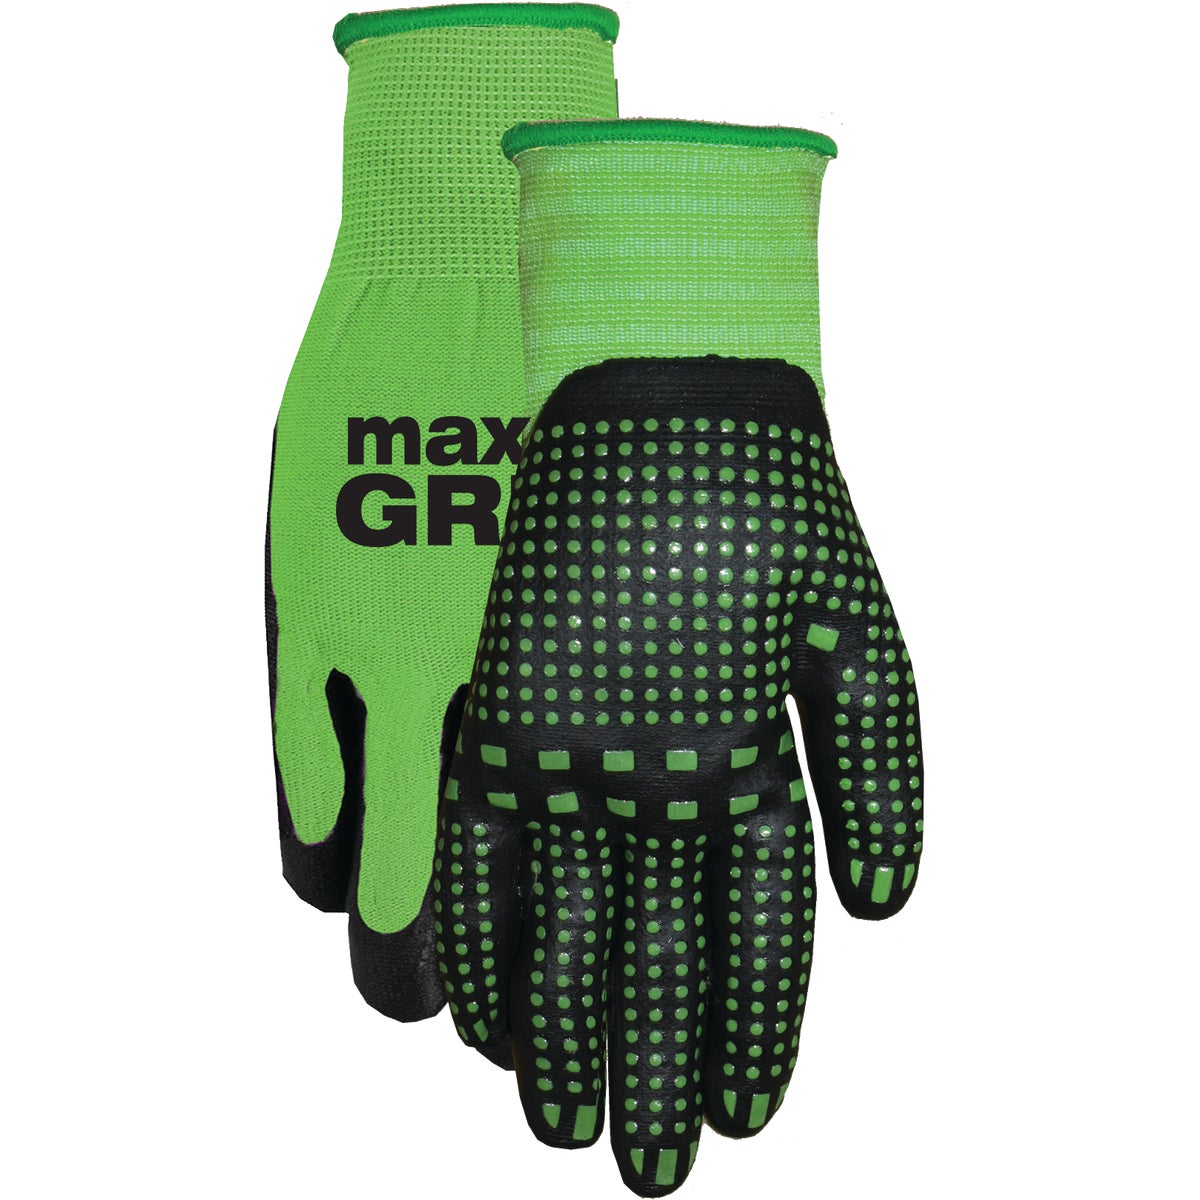 Midwest Quality Glove Max Grip Men's Small/Medium Nitrile Coated Glove